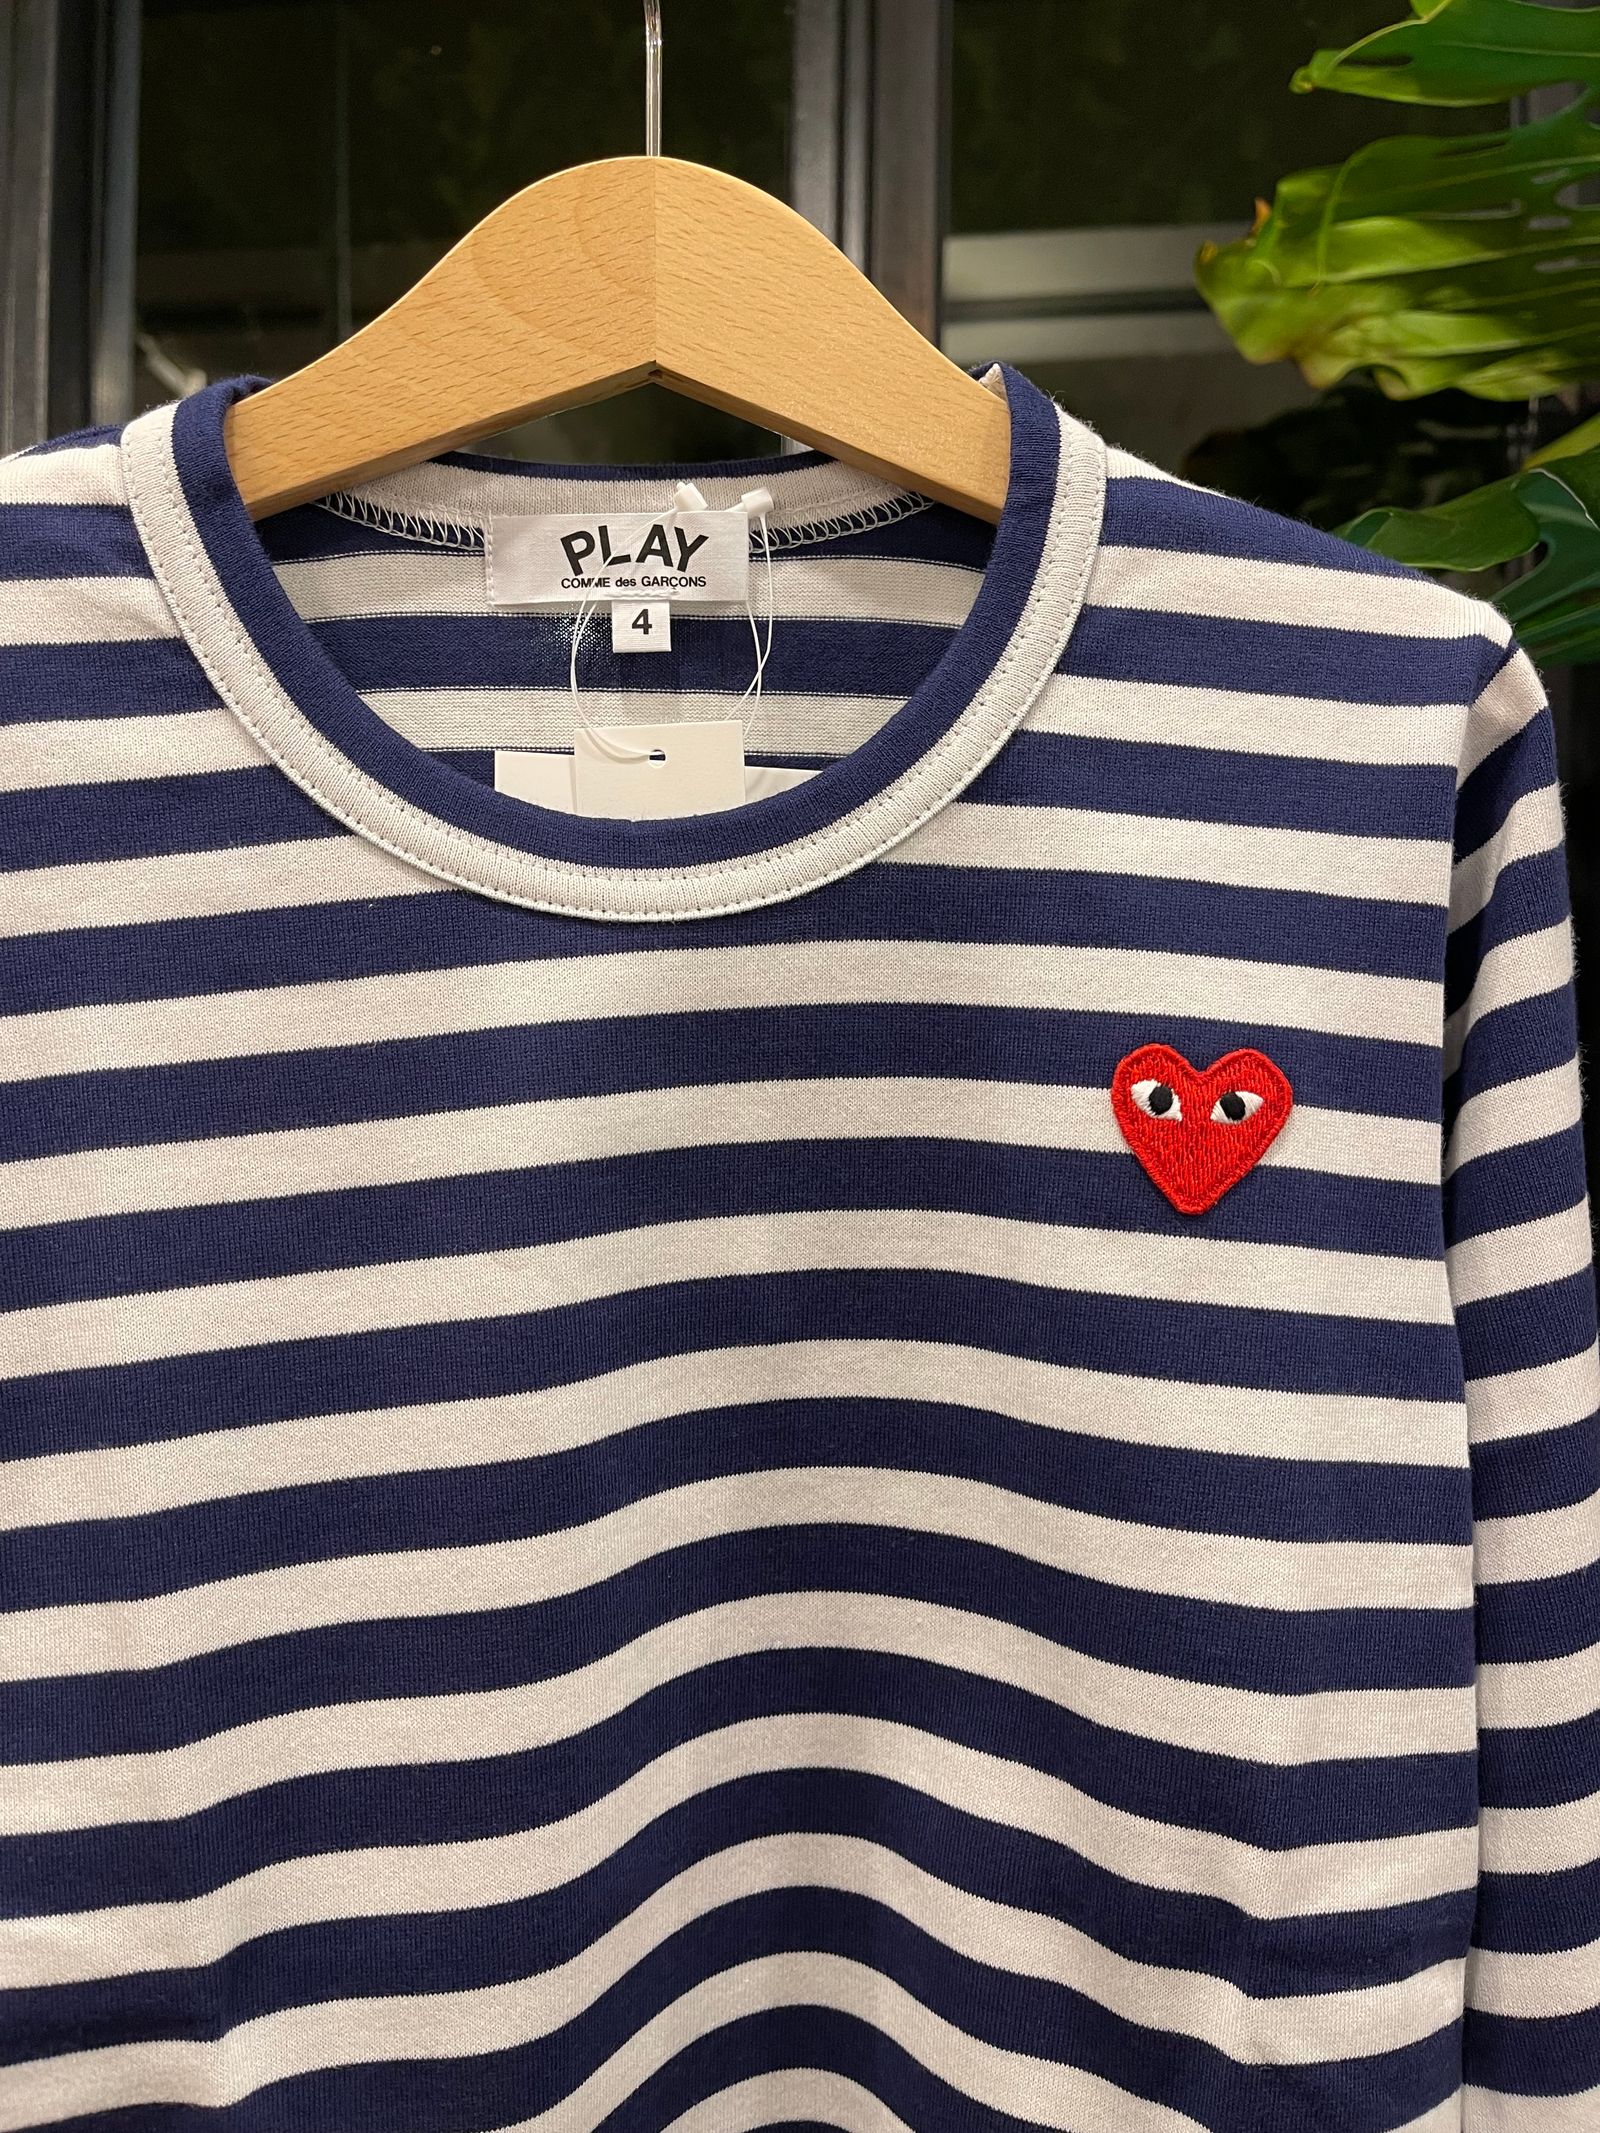 PLAY COMME des GARCONS - プレイコムデギャルソン PLAY STRIPED T 